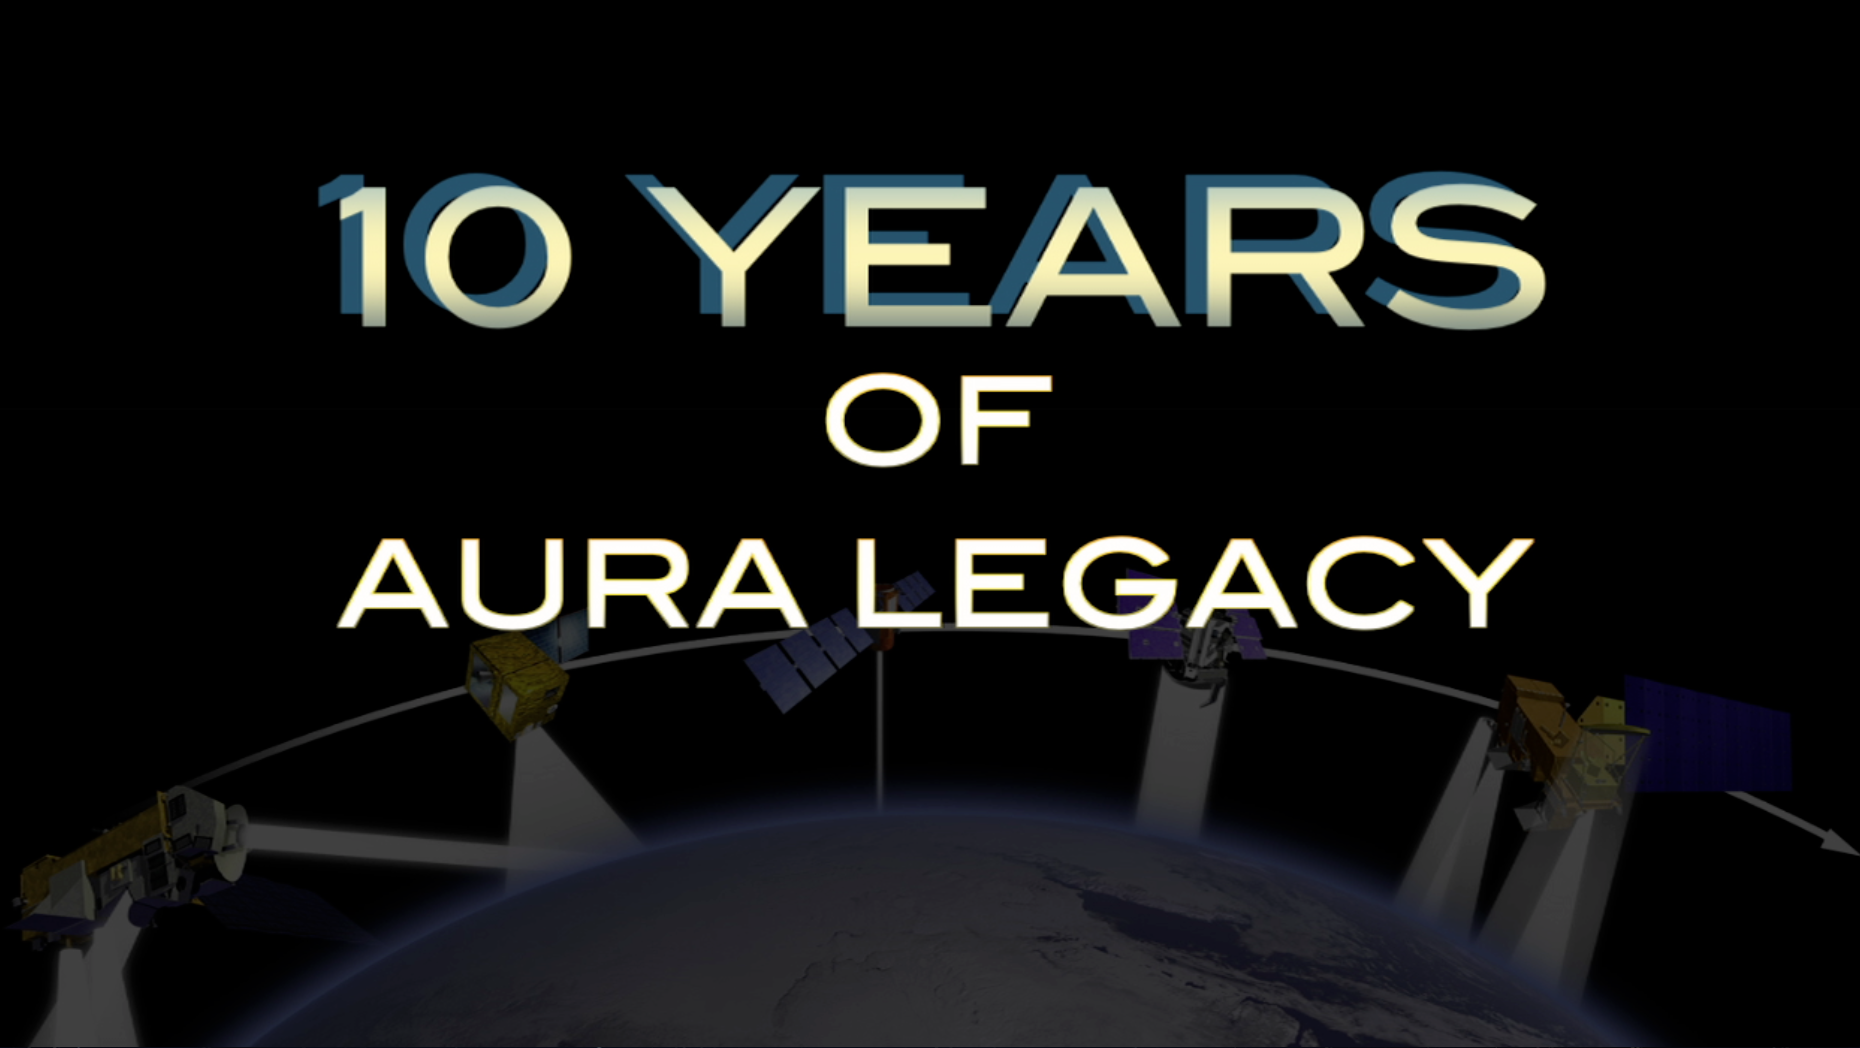 NASA Goddard scientists Paul Newman and Bryan Duncan describe the amazing changes Aura has witnessed in its first ten years of Earth observation.For complete transcript, click here.